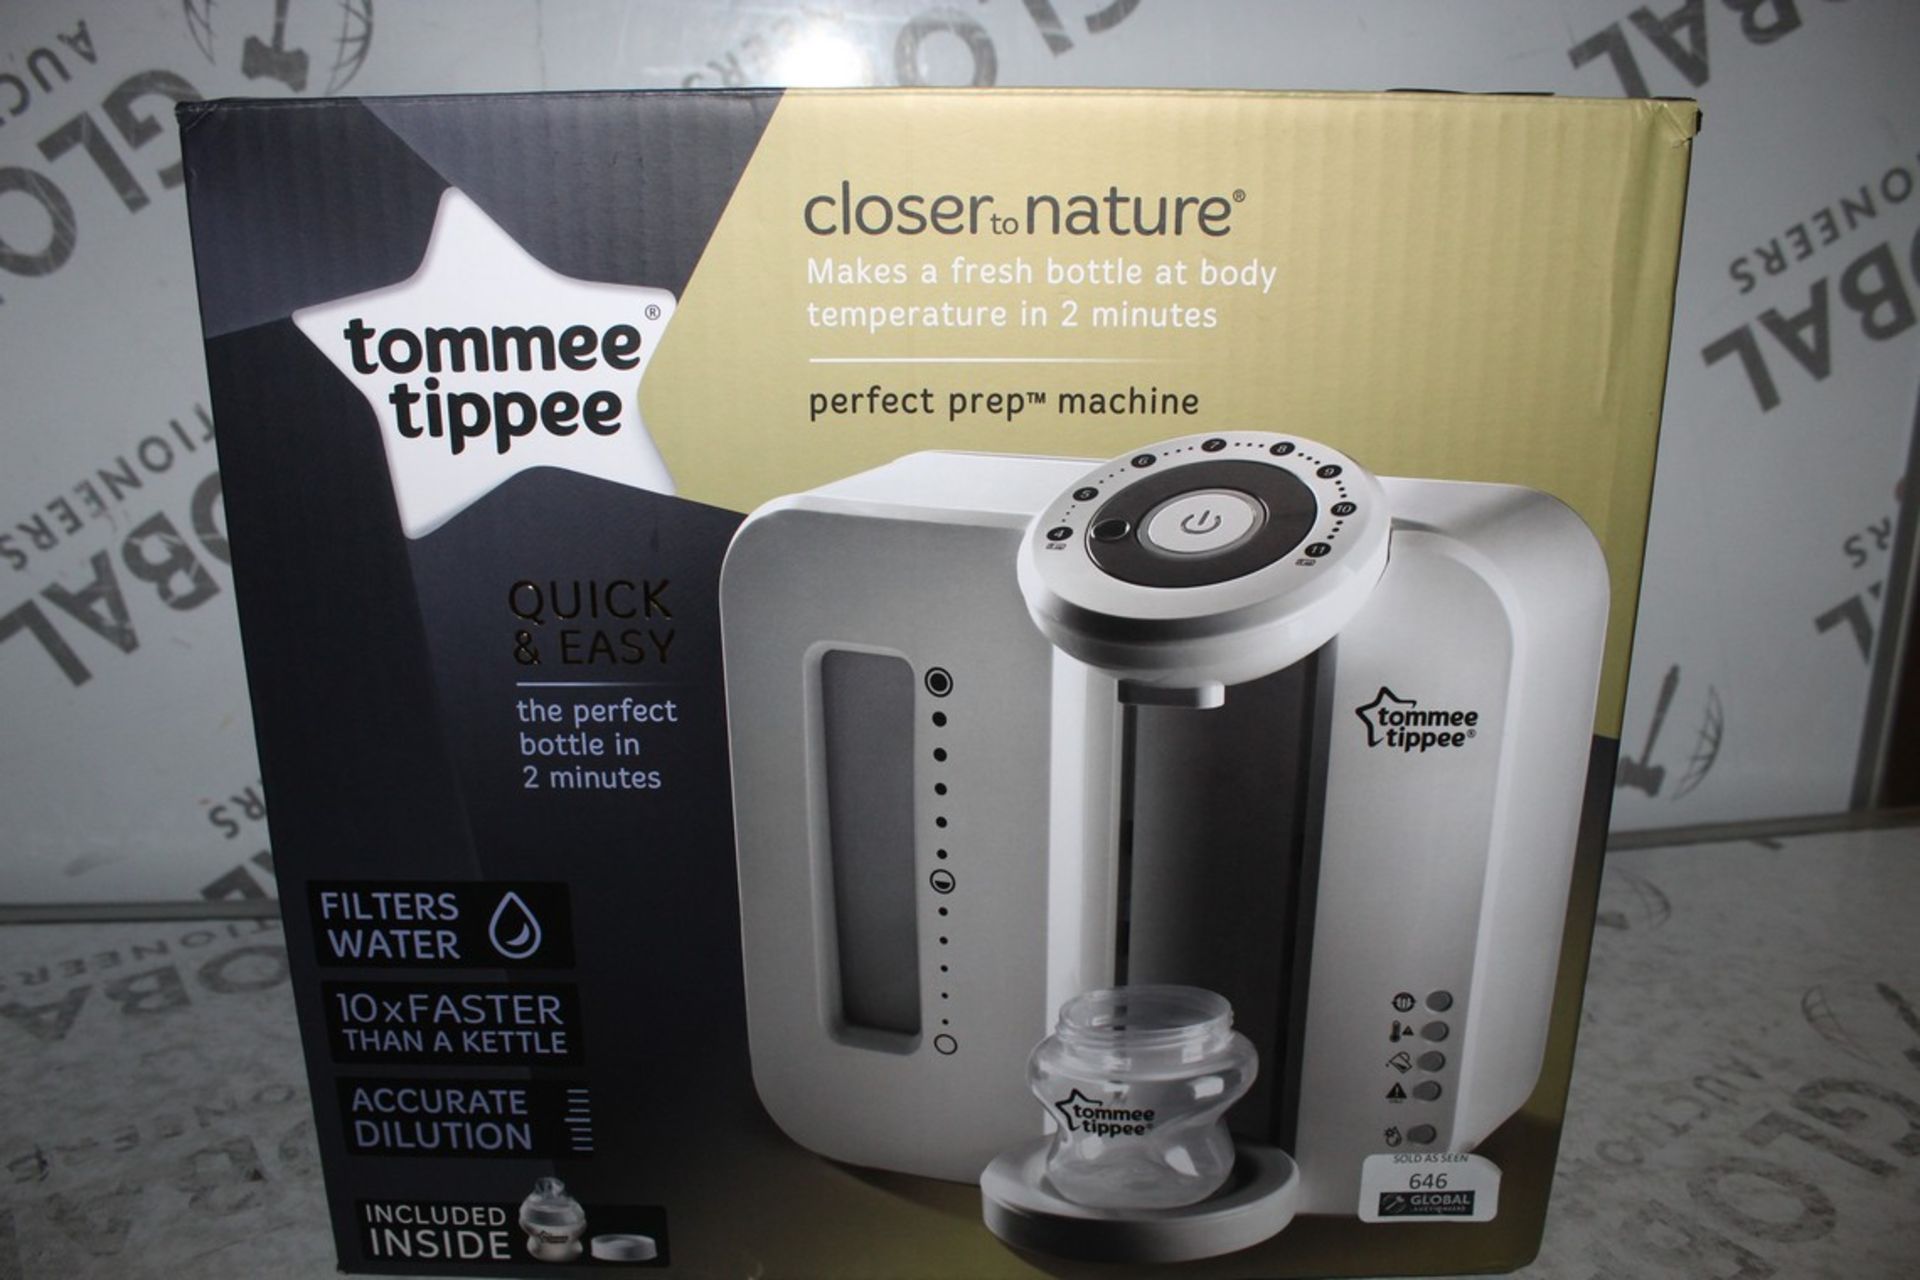 Boxed Tommee Tippee Closer to Nature Perfect Preparation Bottle Warming Station RRP £70 (3625060) (